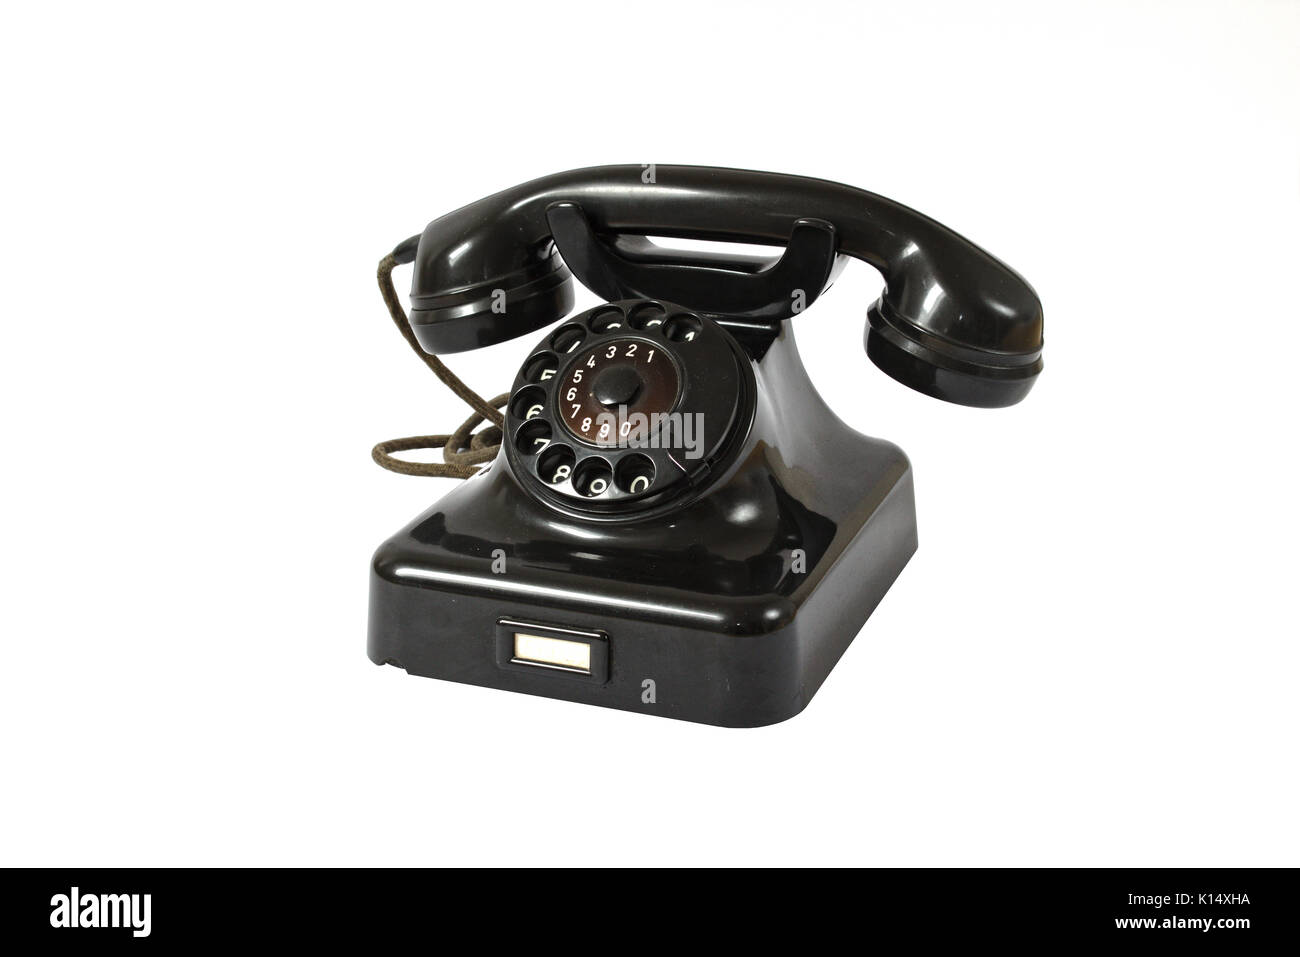 Old black rotary dial telephone Stock Photo